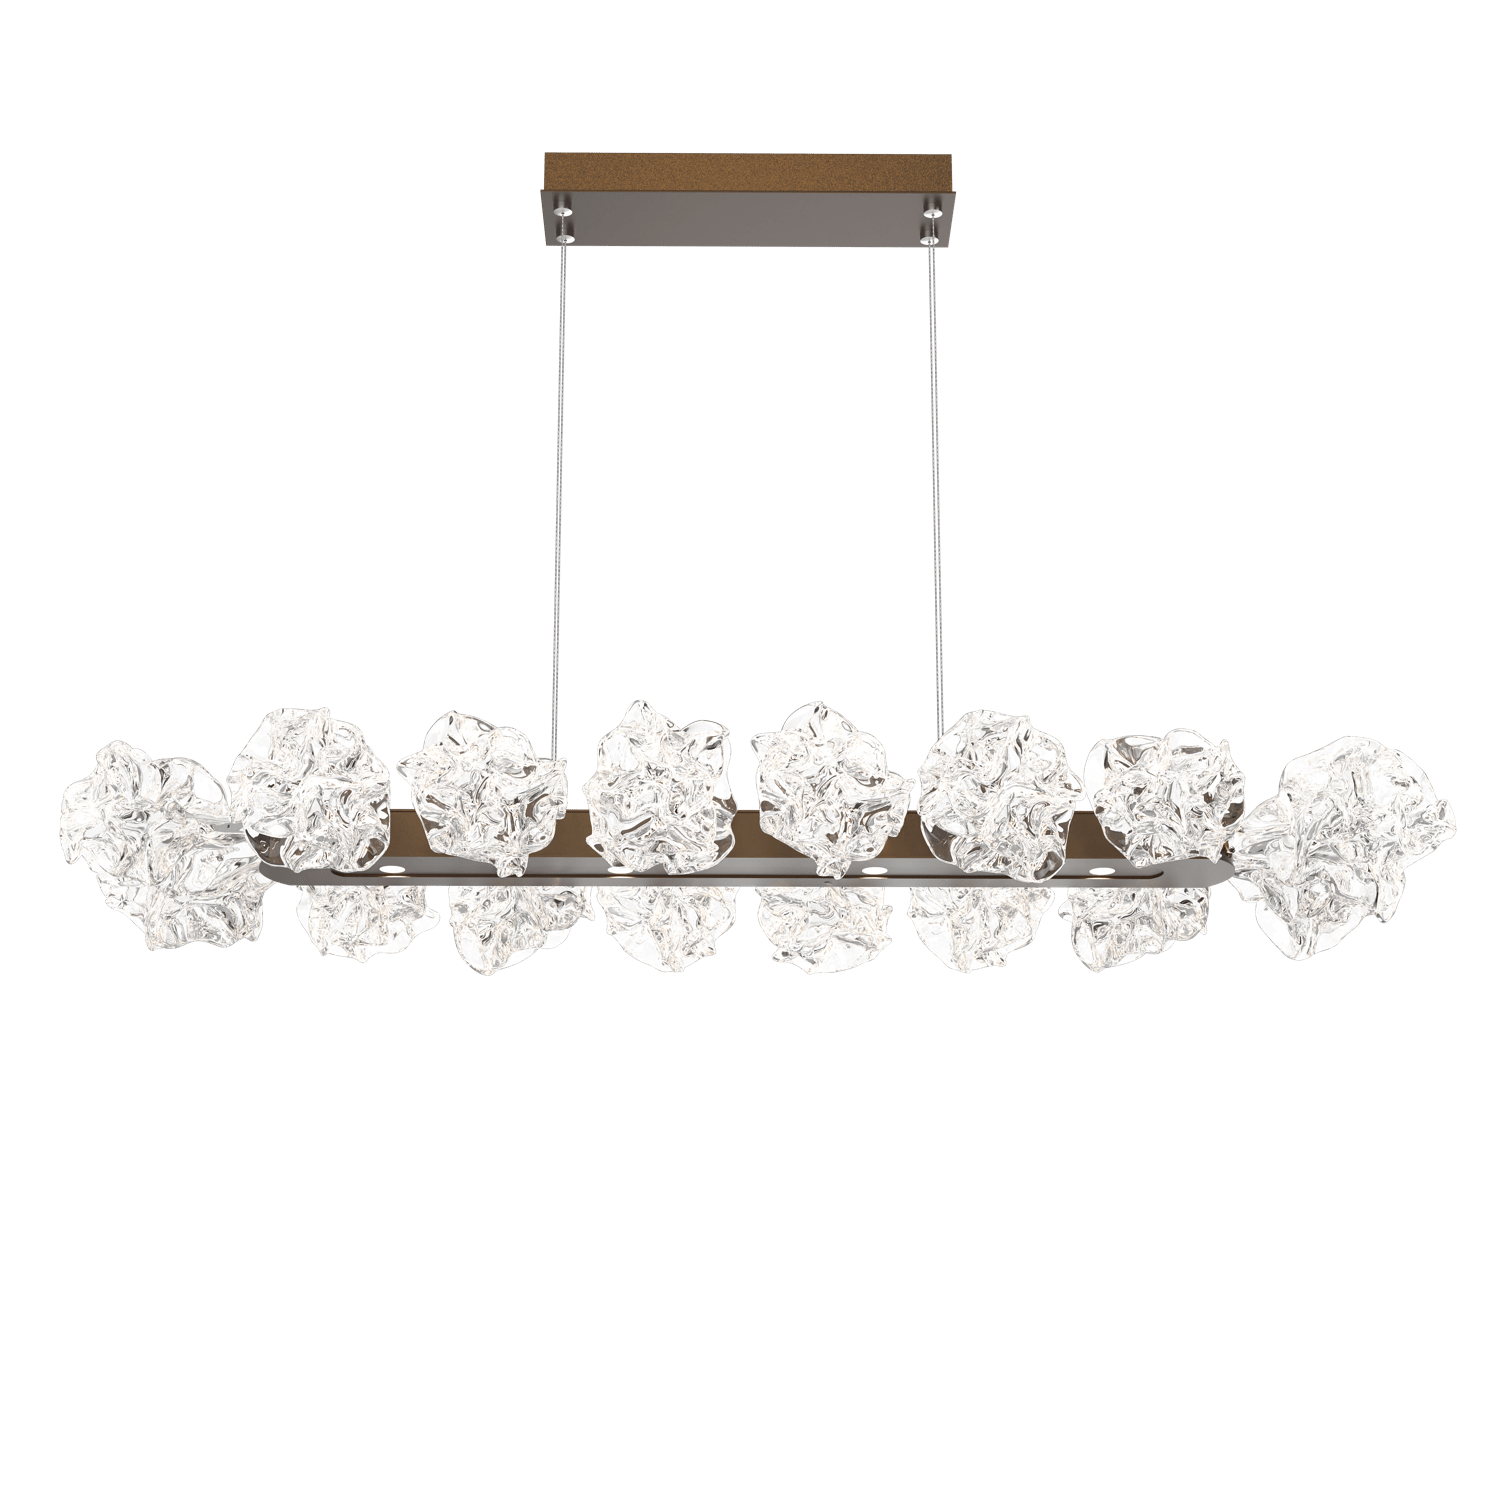 PLB0059-48-FB-Hammerton-Studio-Blossom-48-inch-linear-chandelier-with-flat-bronze-finish-and-clear-handblown-crystal-glass-shades-and-LED-lamping